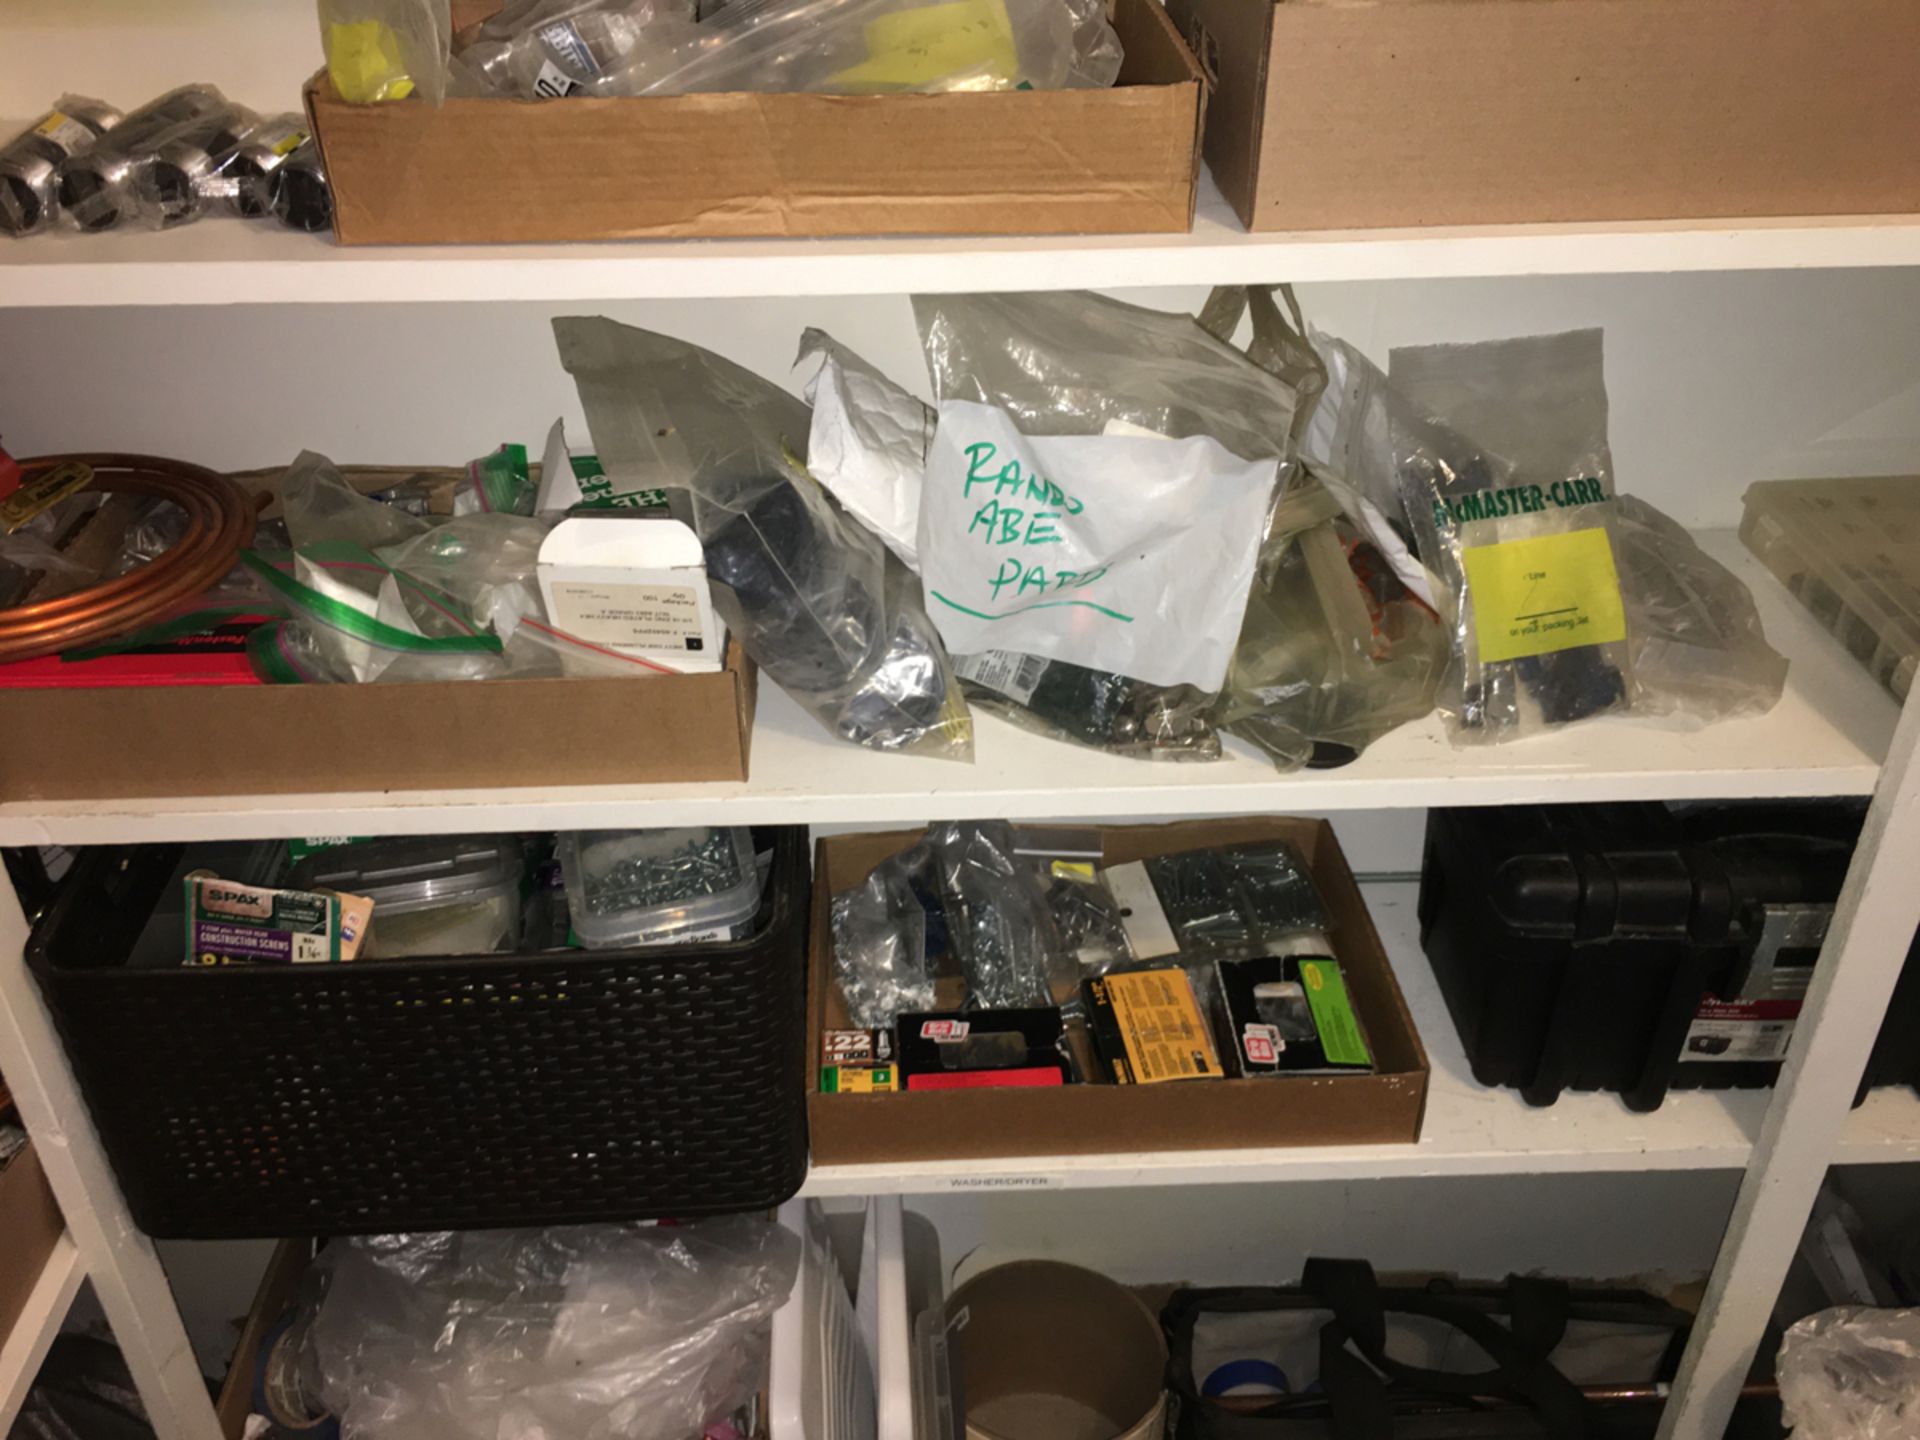 Contents Of Parts And Spares Room - Image 12 of 16